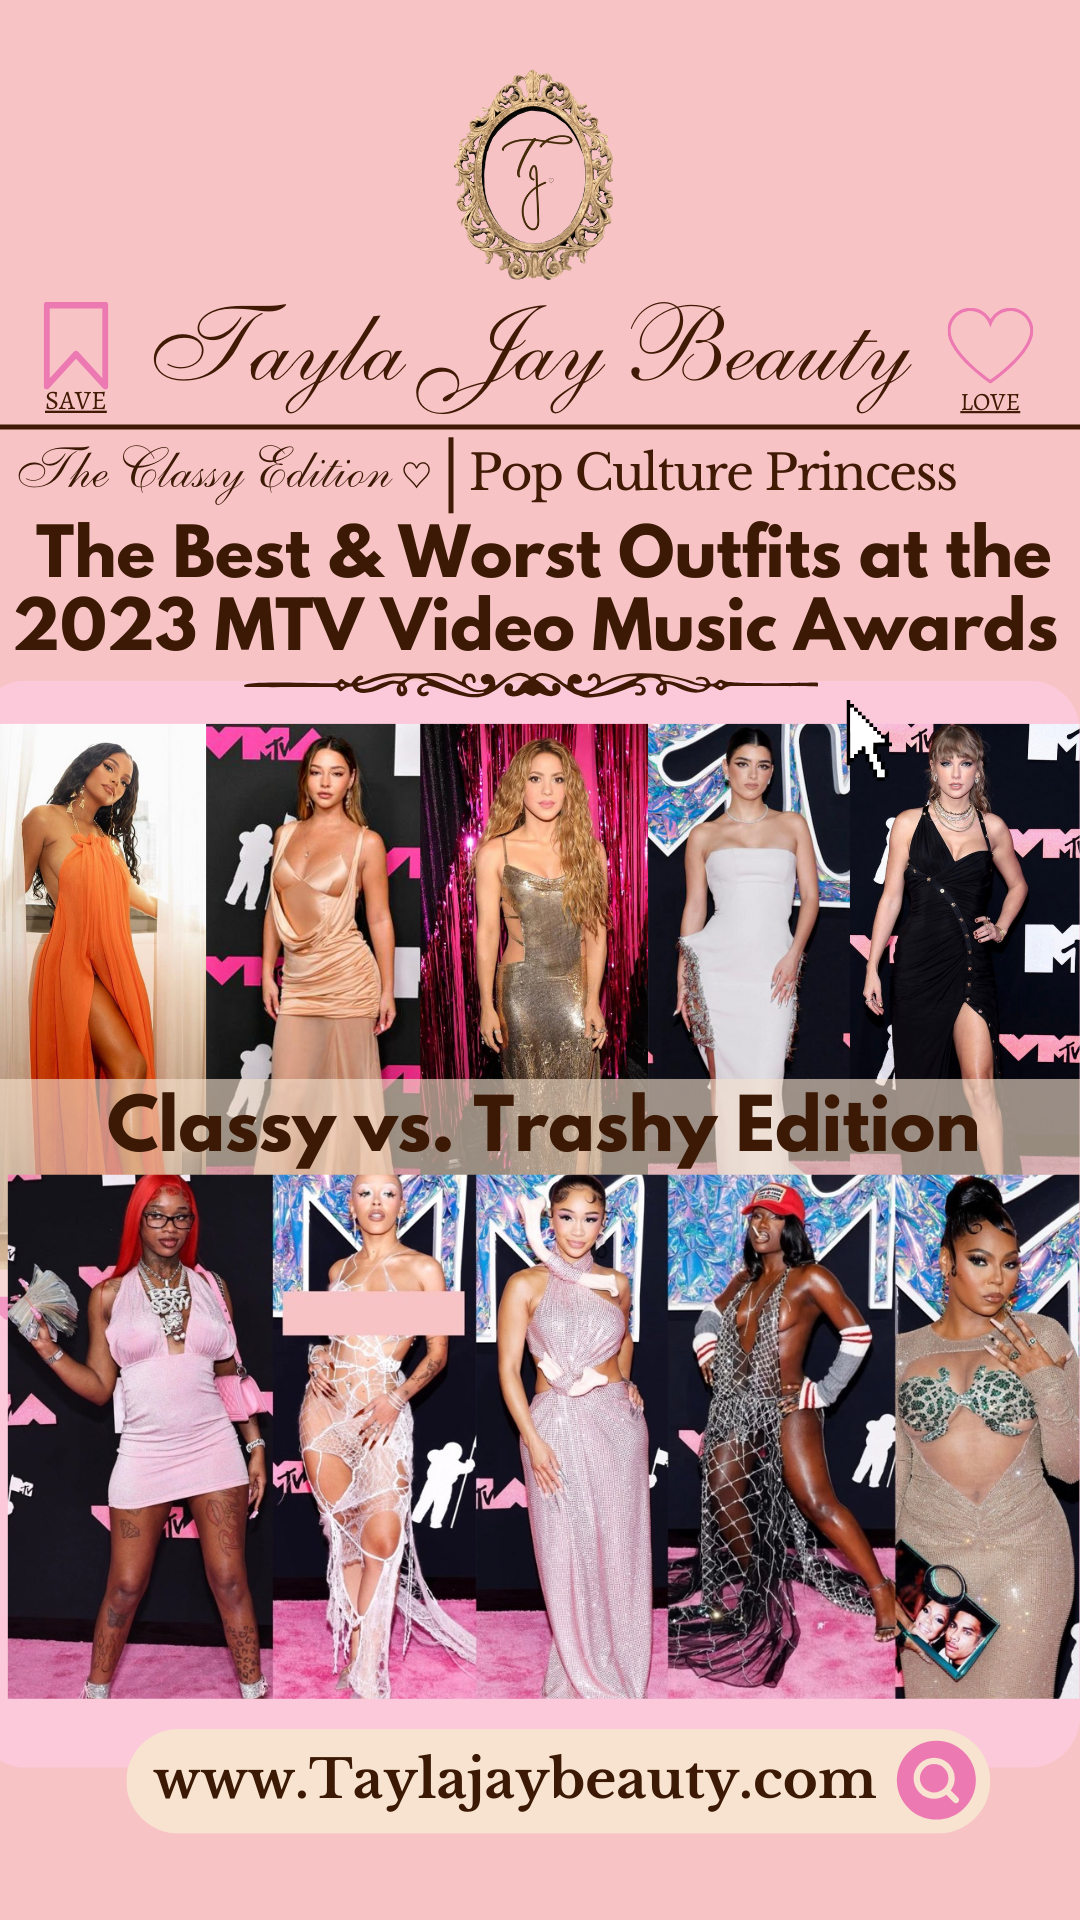 MTV VMA 2023 Best & Worst Outfits: Classy & Trashy Edition